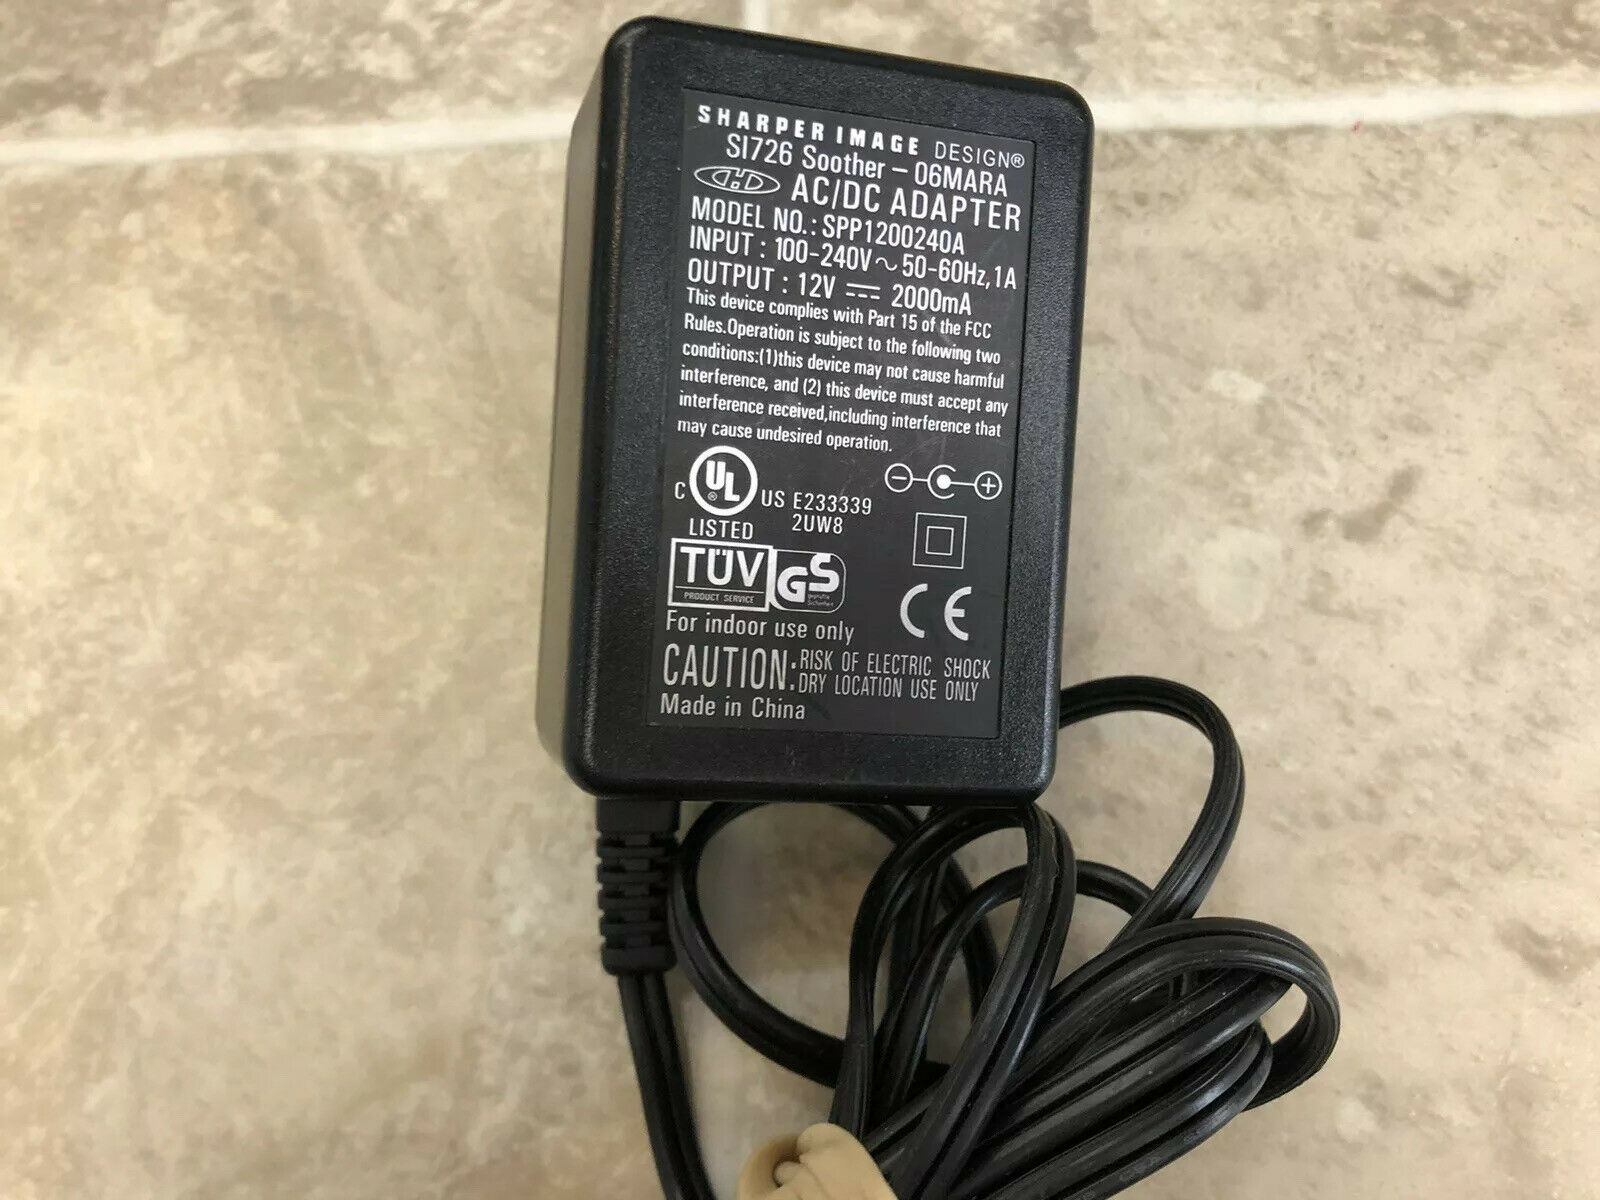 *Brand NEW*Sharper Image 12V 2000mA AC DC Adapter SI726 SPP1200240A POWER SUPPLY